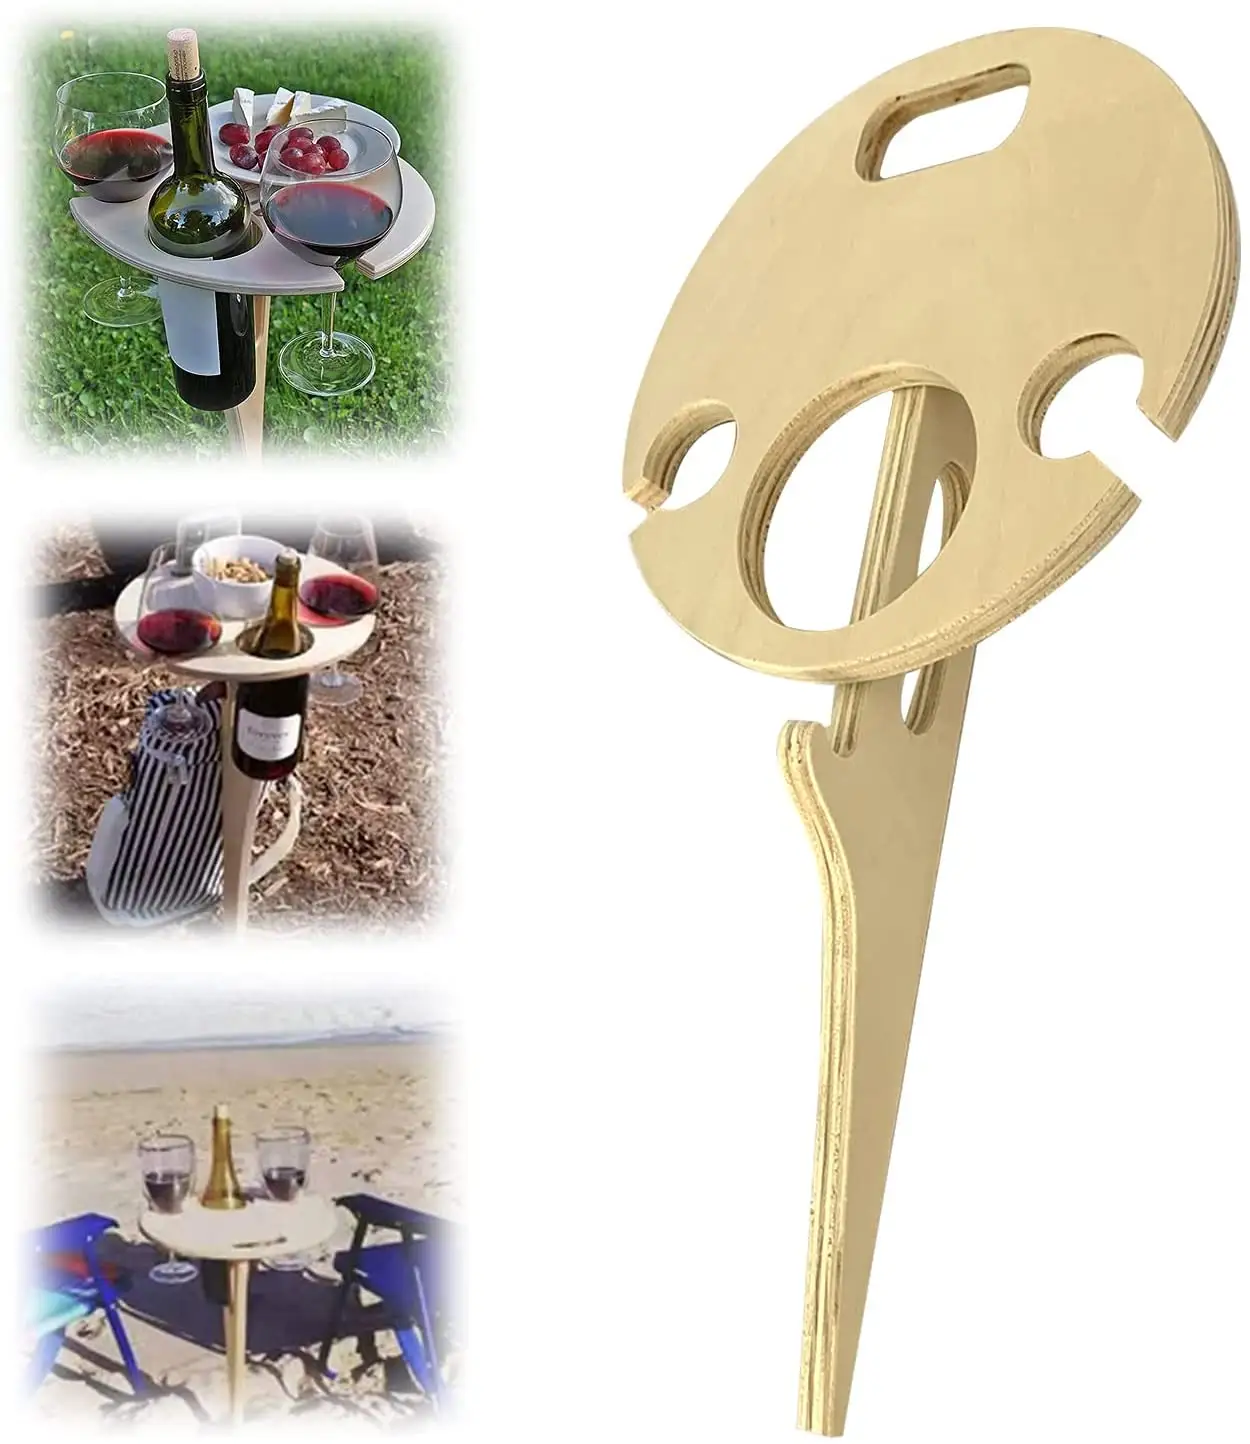 A3669  Foldable Wine Cup Holder Display Camping Wood Hanging Rack Picnic Tables Beach Goblet Shelf Outdoor Portable Wine Table